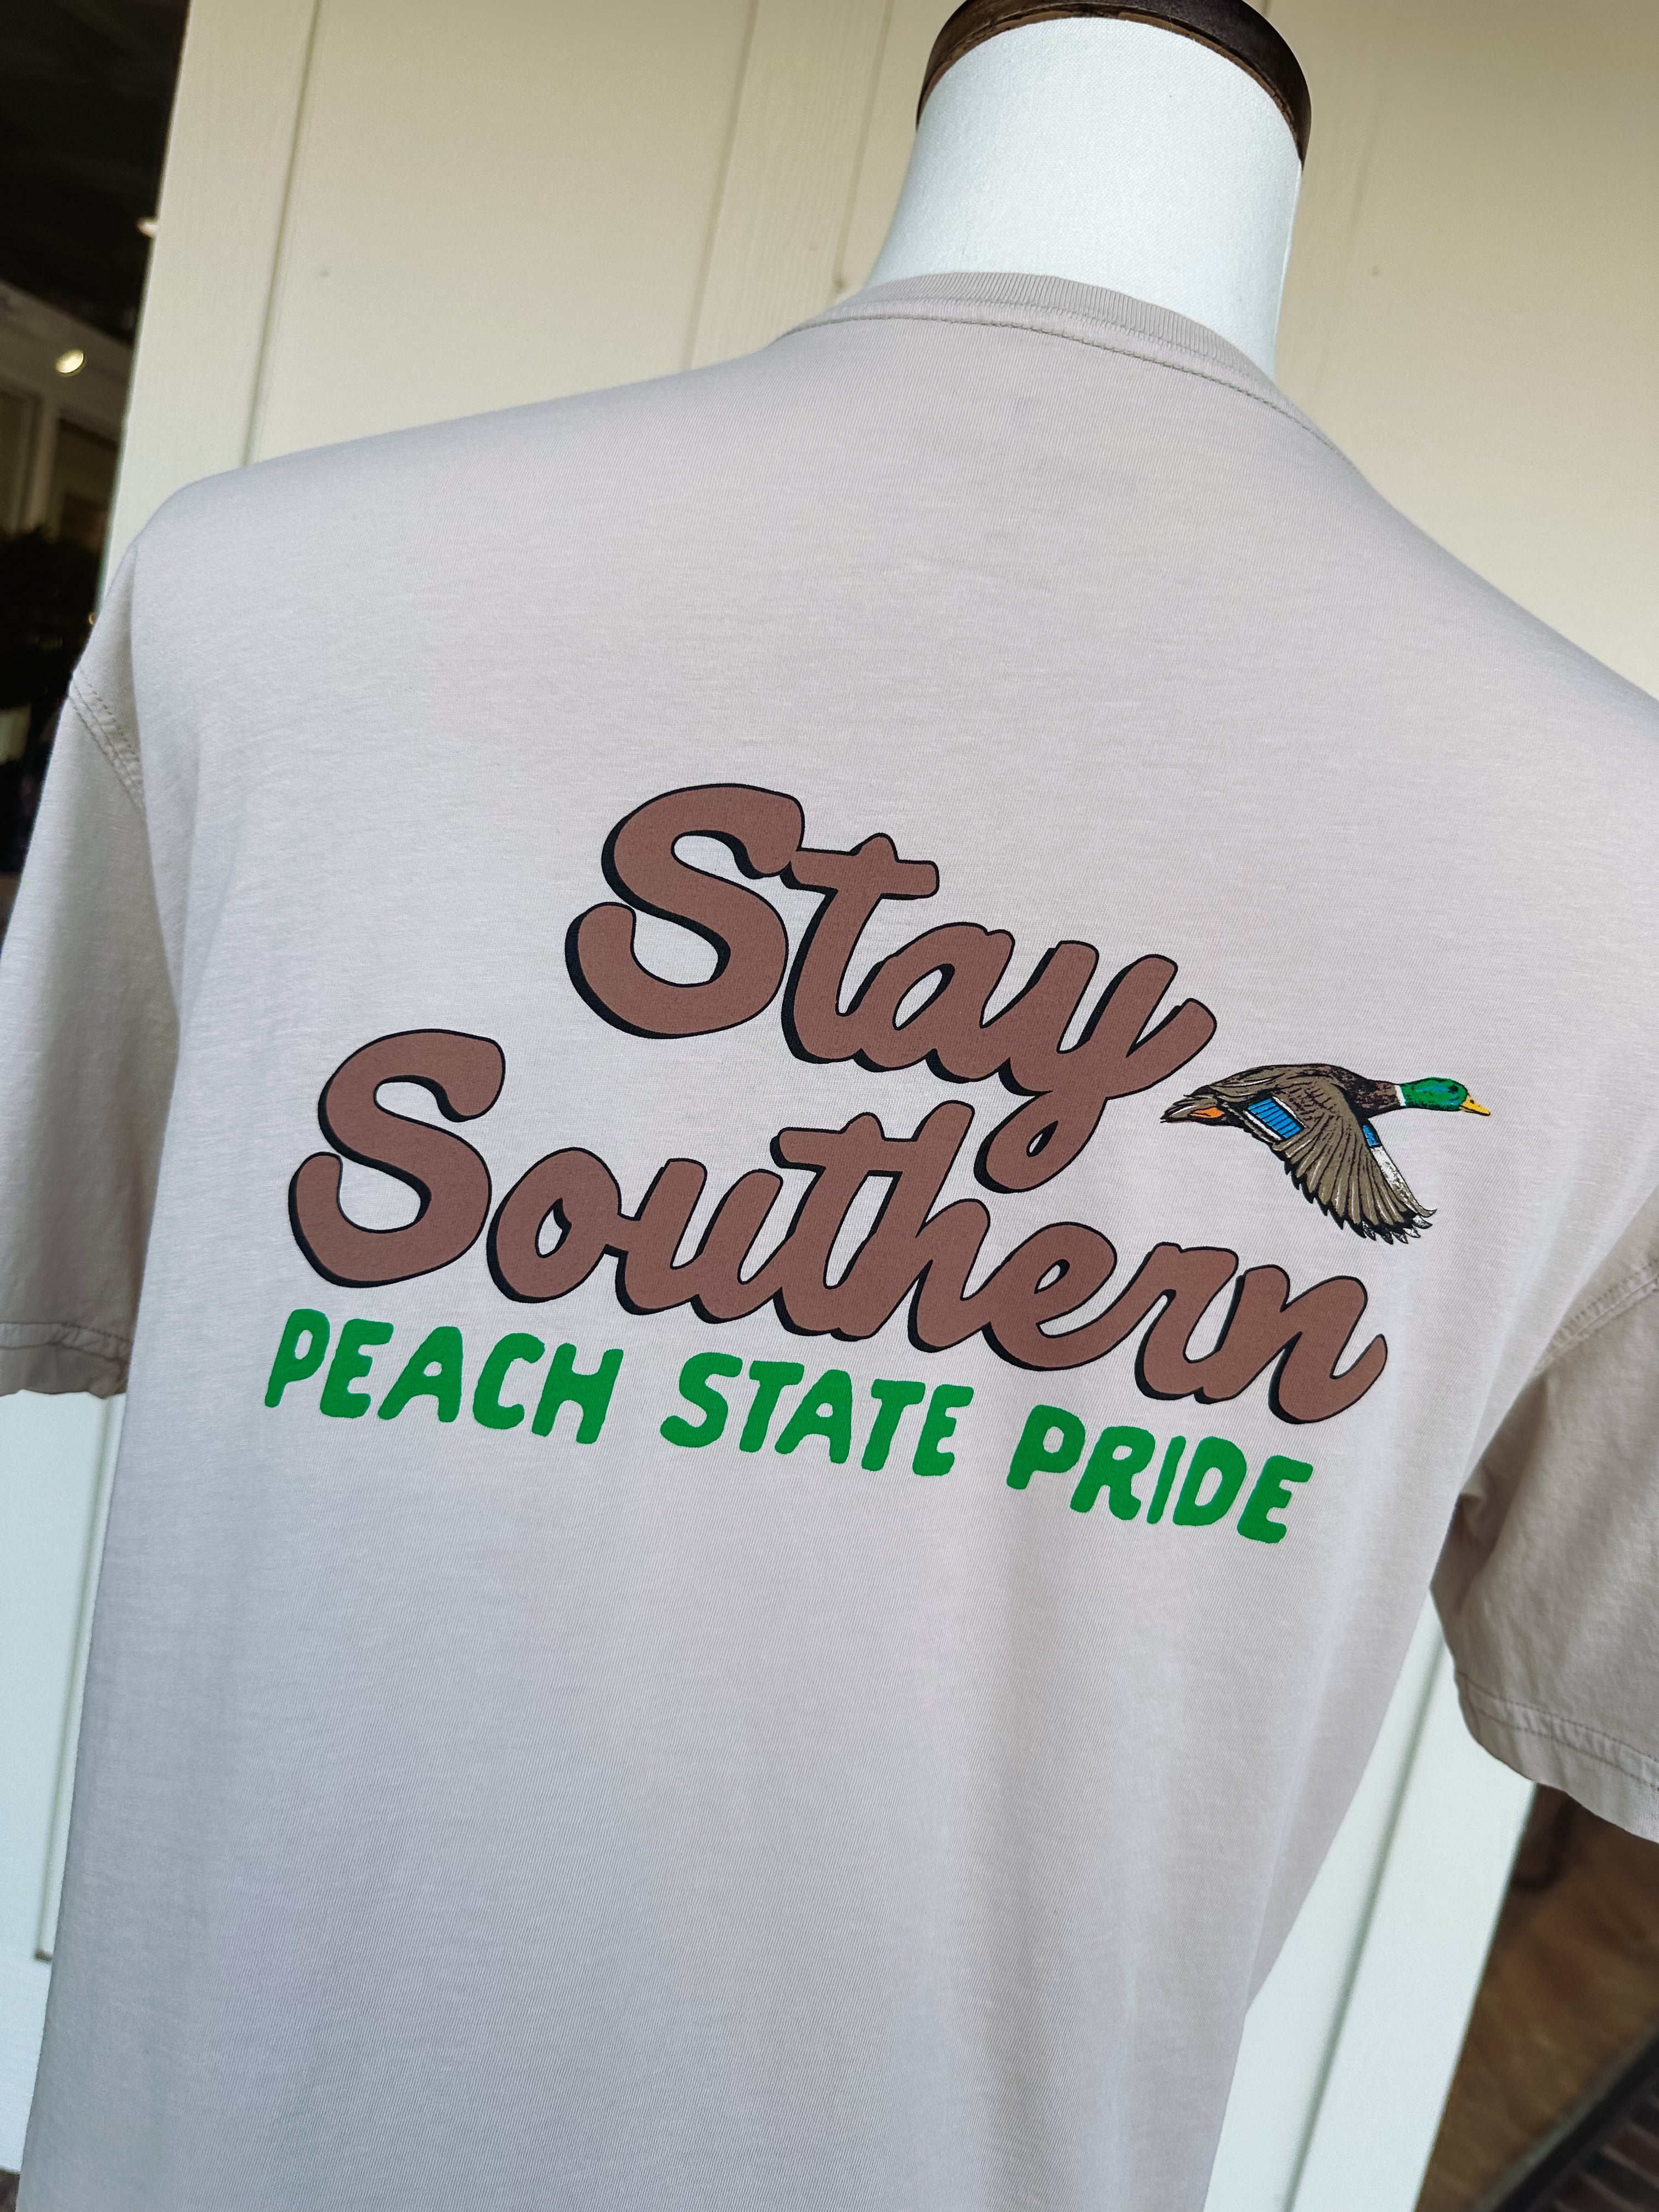 Stay Southern Duck Tee by Peach State Pride